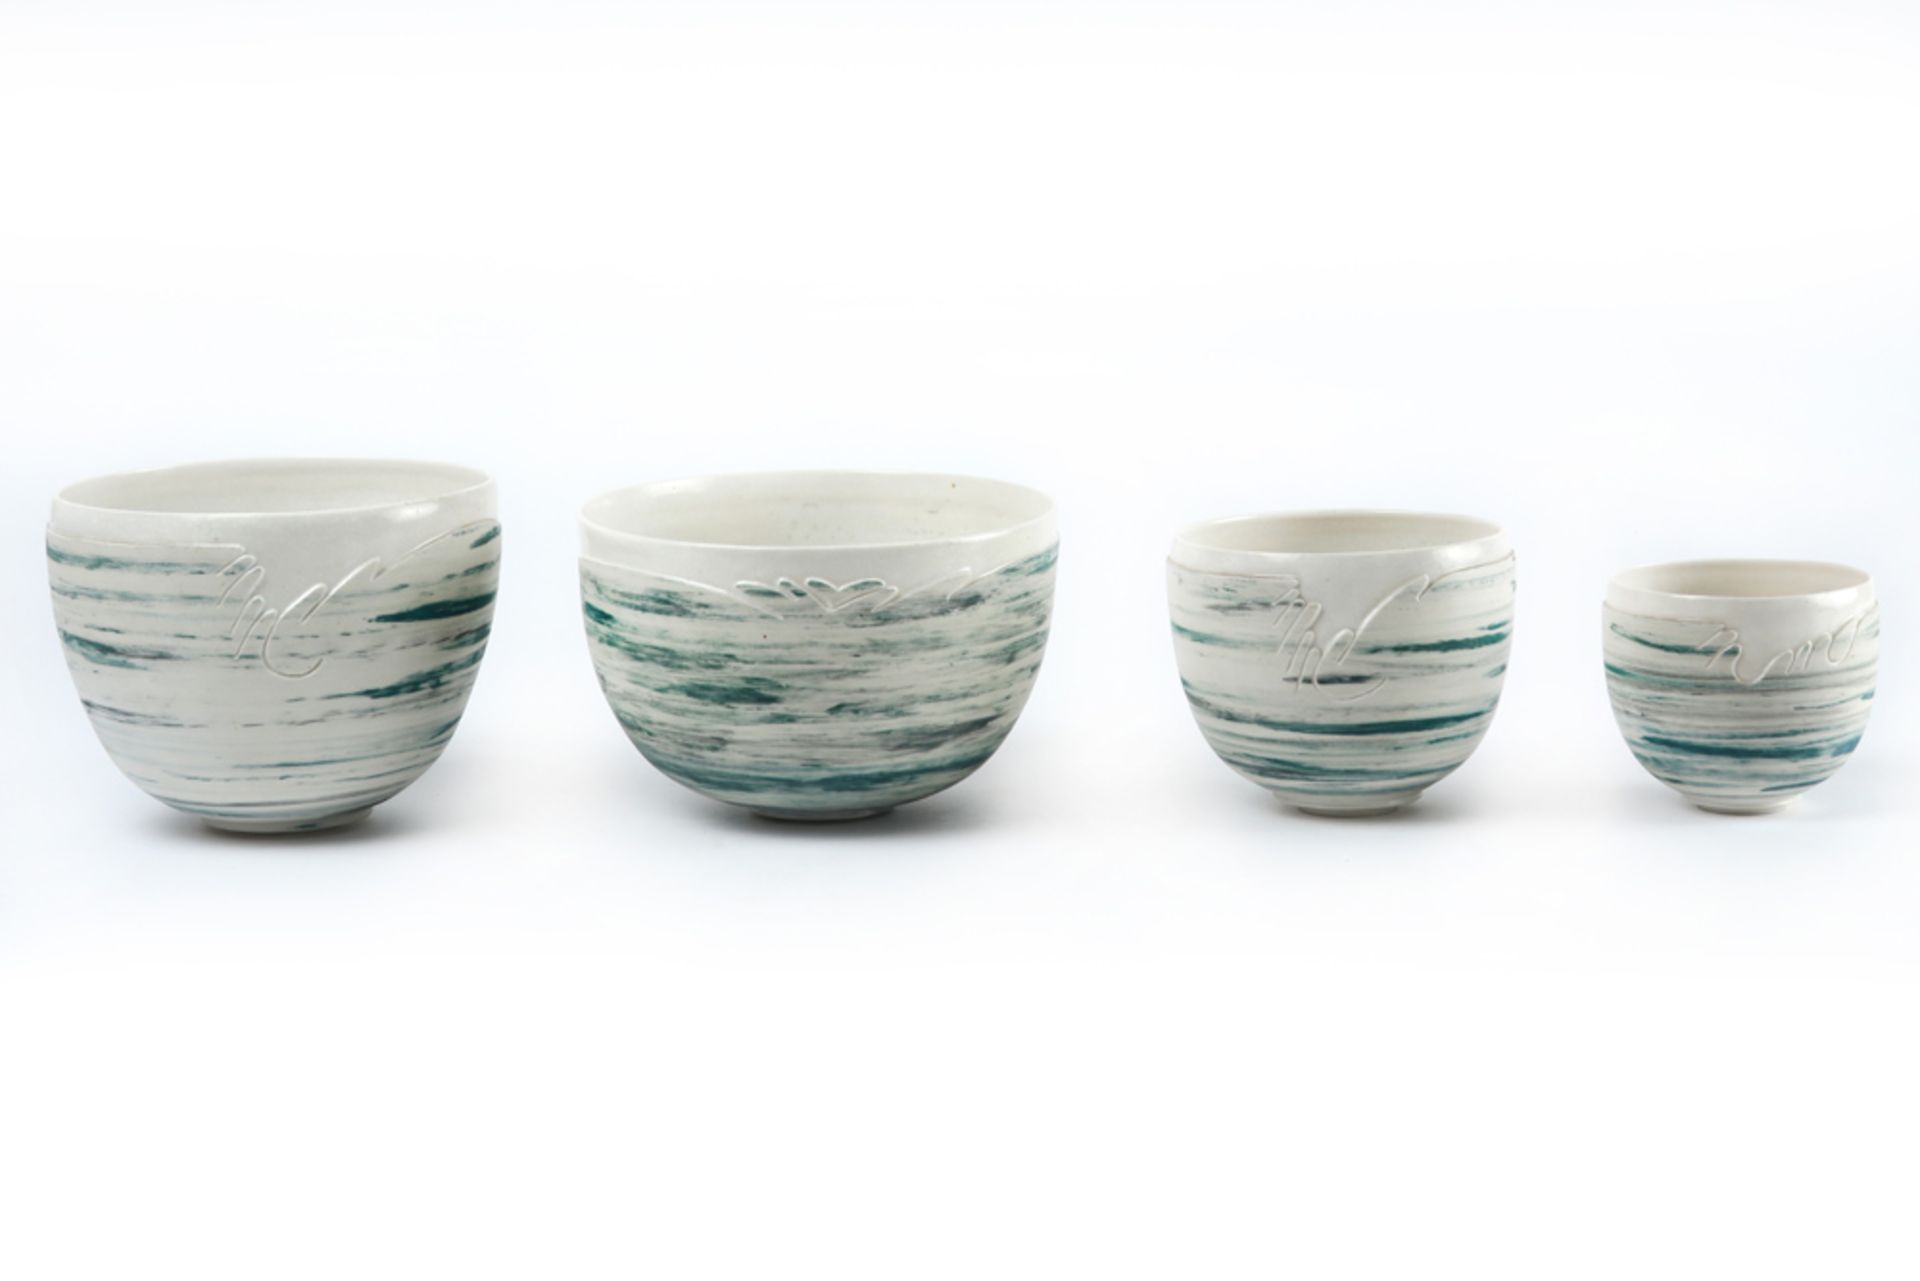 four small bowls in ceramic marked by Erik Baeten & Kris Nolmans || ERIK BAETEN & KRIS NOLMANS ( - Bild 2 aus 4